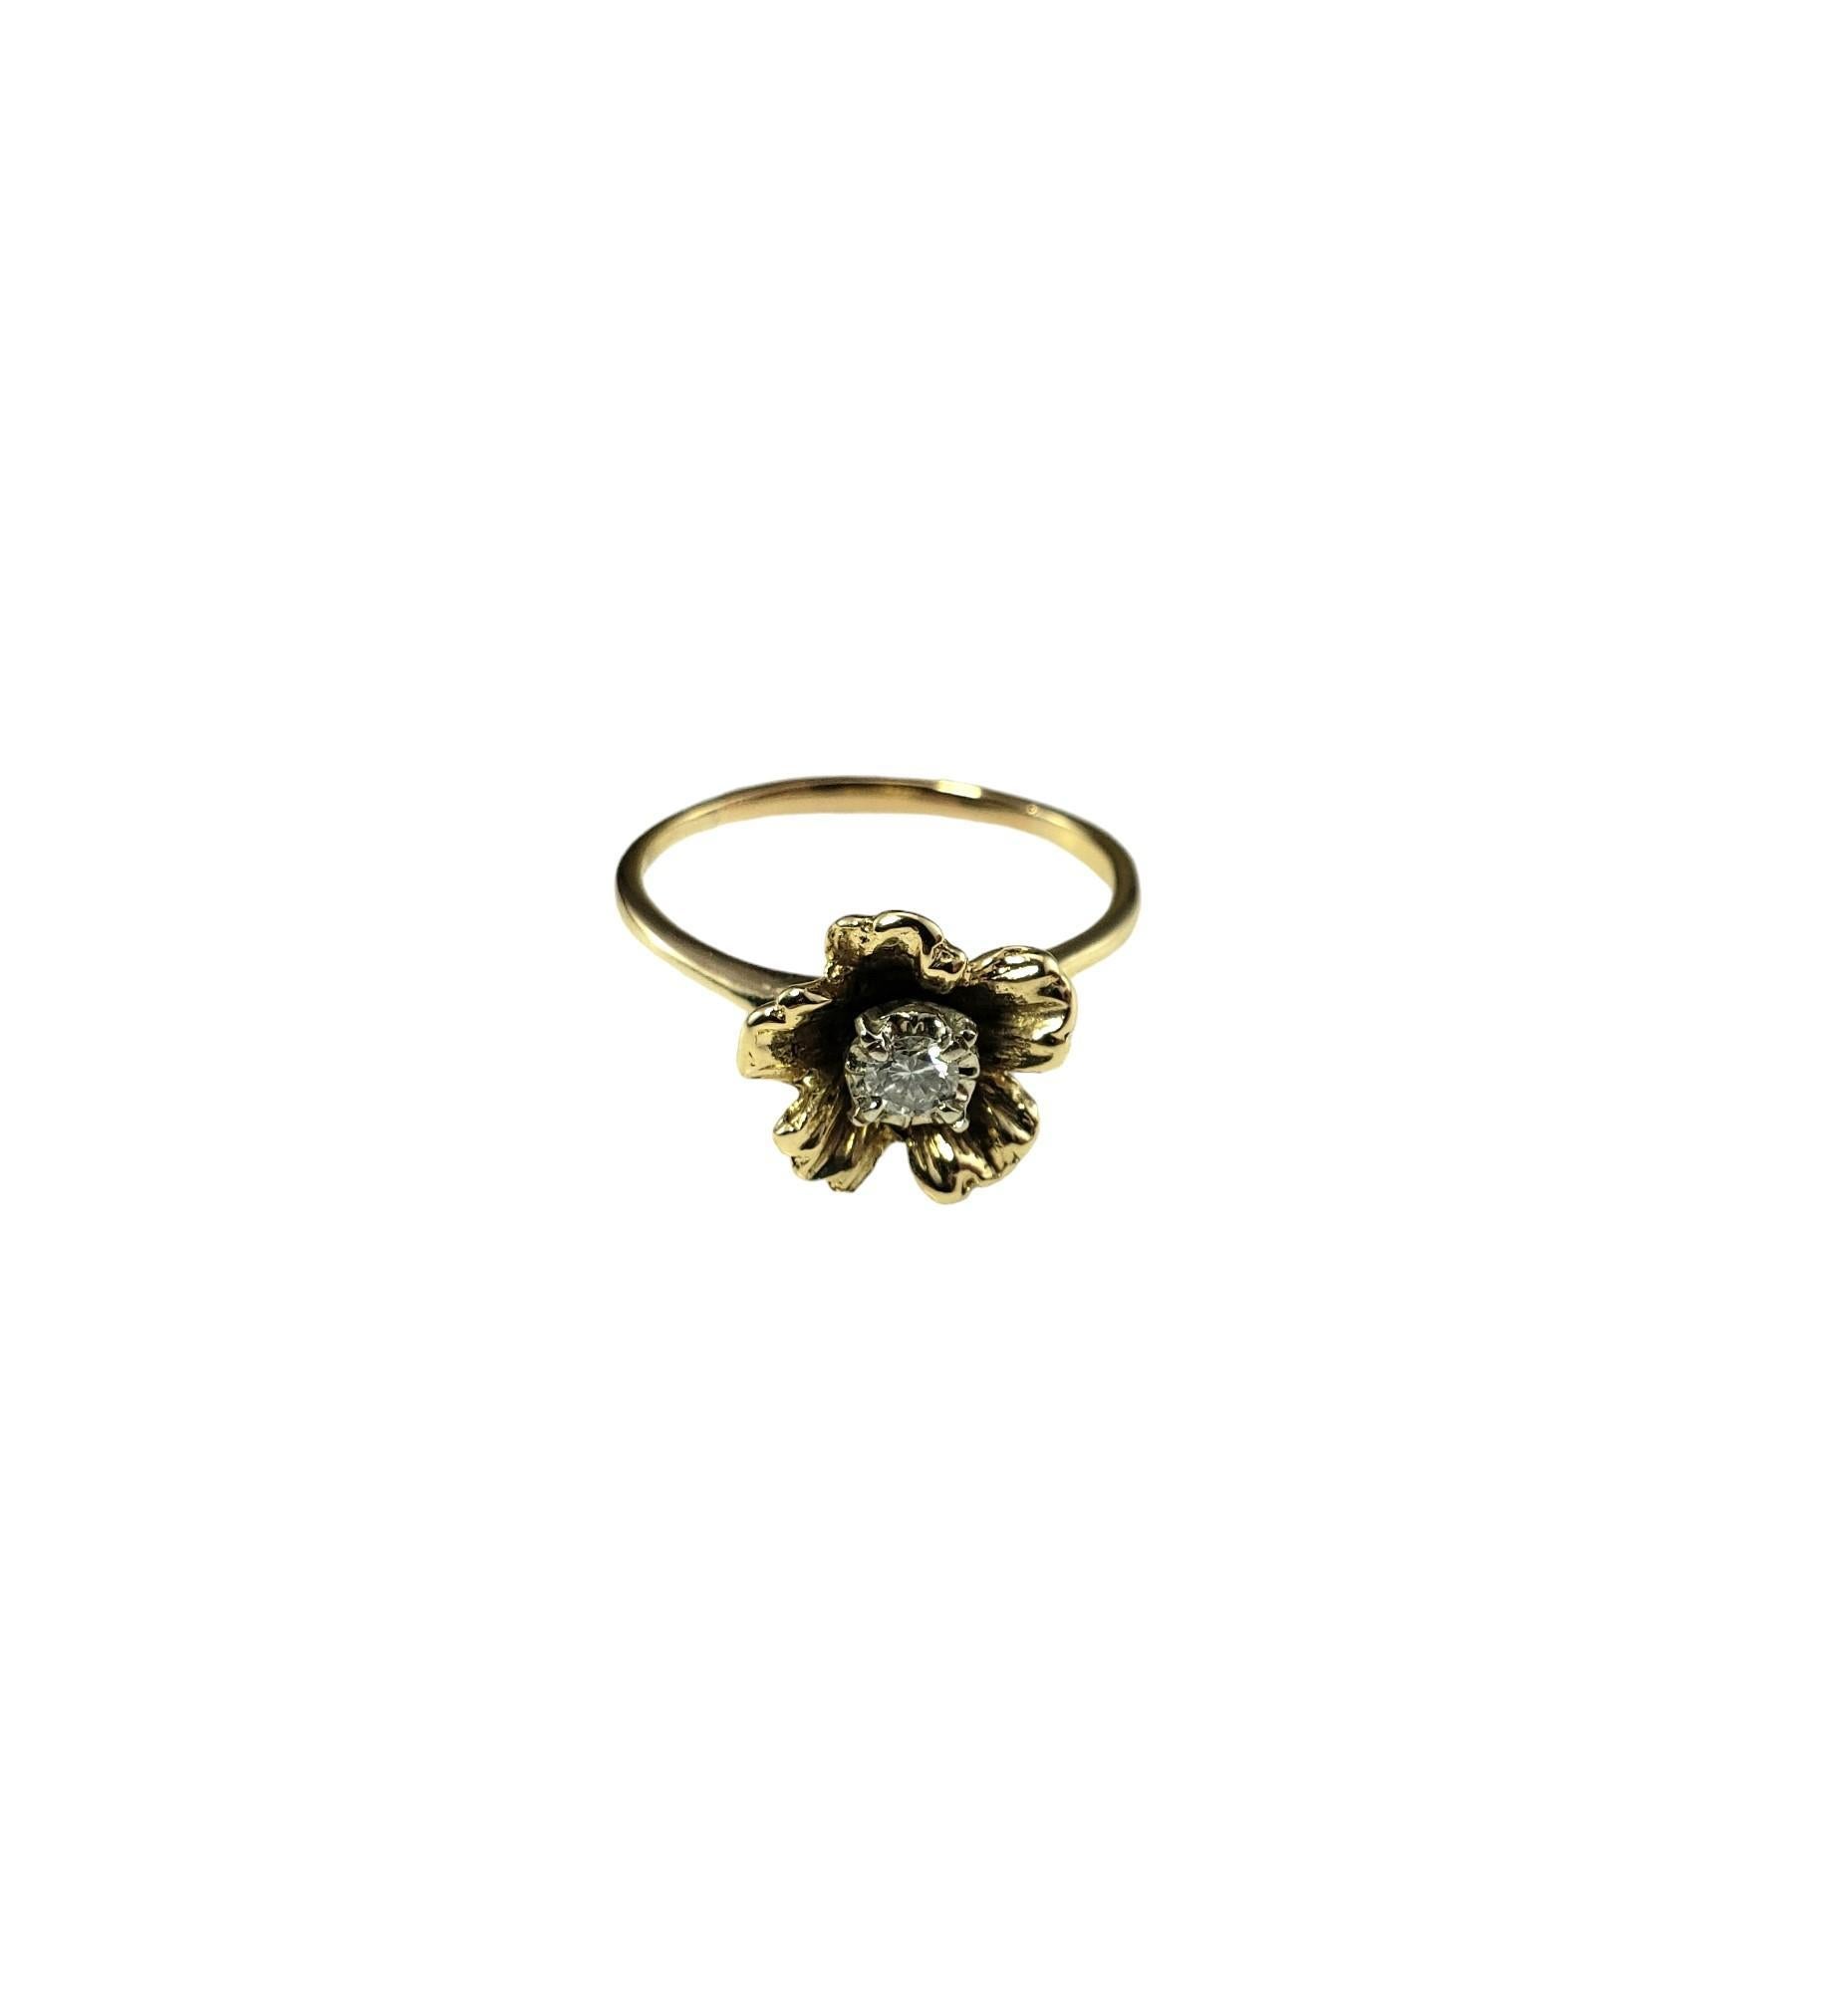 14 Karat Yellow Gold and Diamond Flower Ring Size 8

This lovely 14K yellow gold ring features one round brilliant cut diamond set in a beautifully detailed floral design.  

Width: 11 mm.  

Shank: 1 mm.

Approximate total diamond weight: 0.10